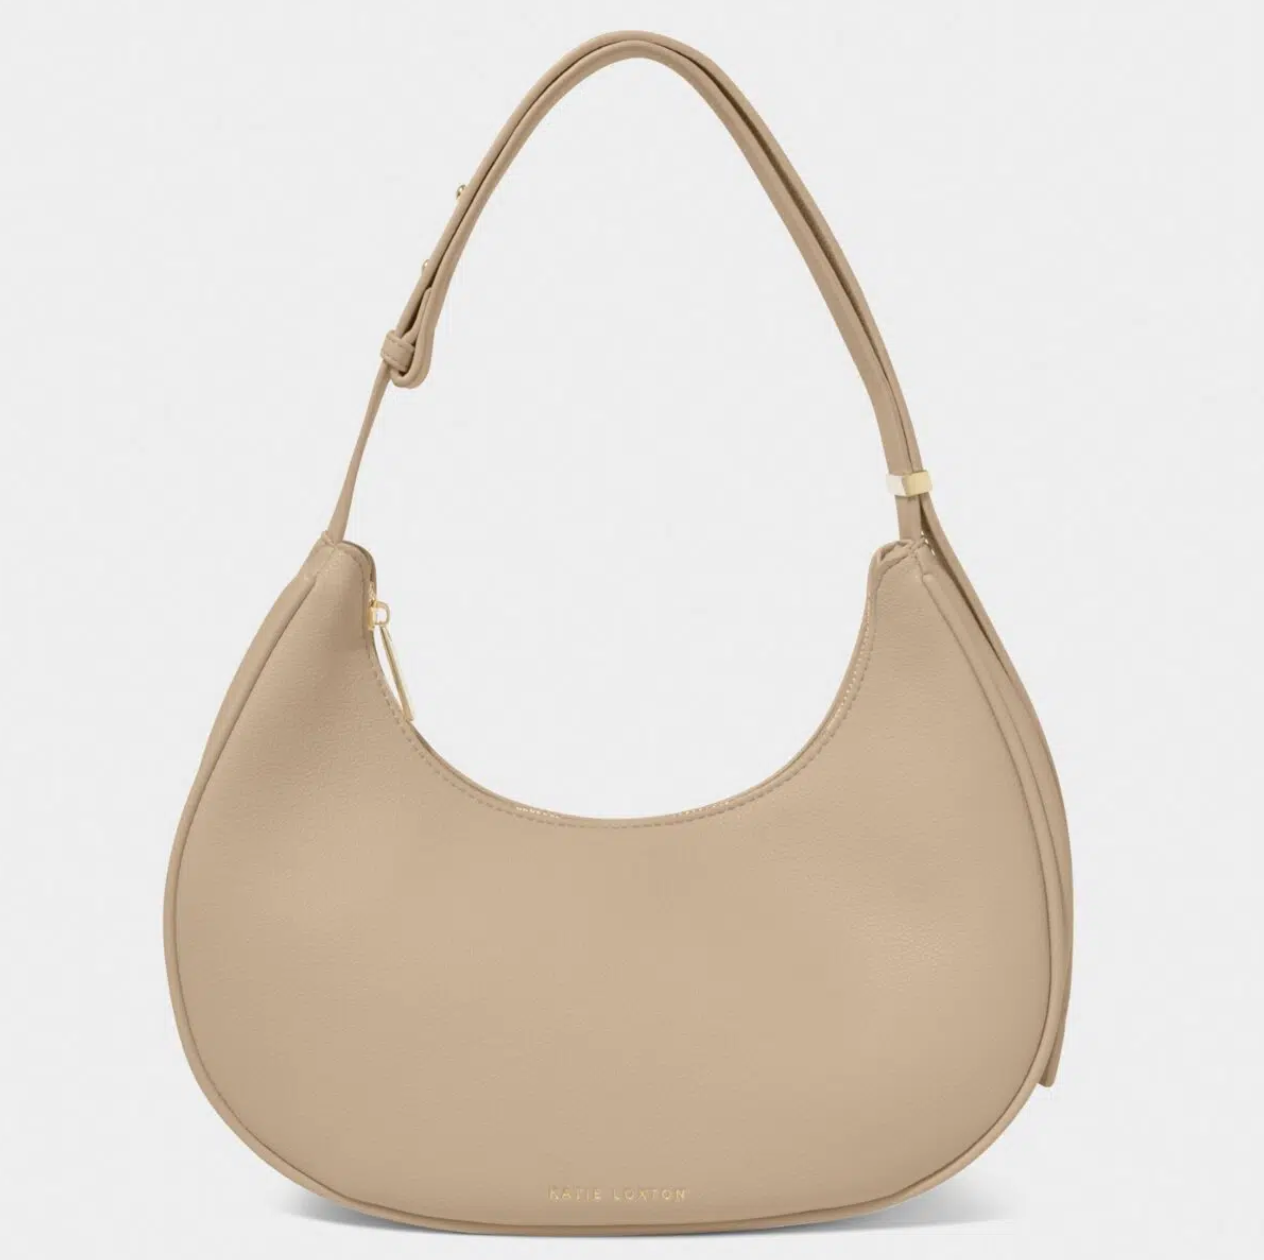 Front view of the Fearne handbag, showing its scoop shape, against a white background